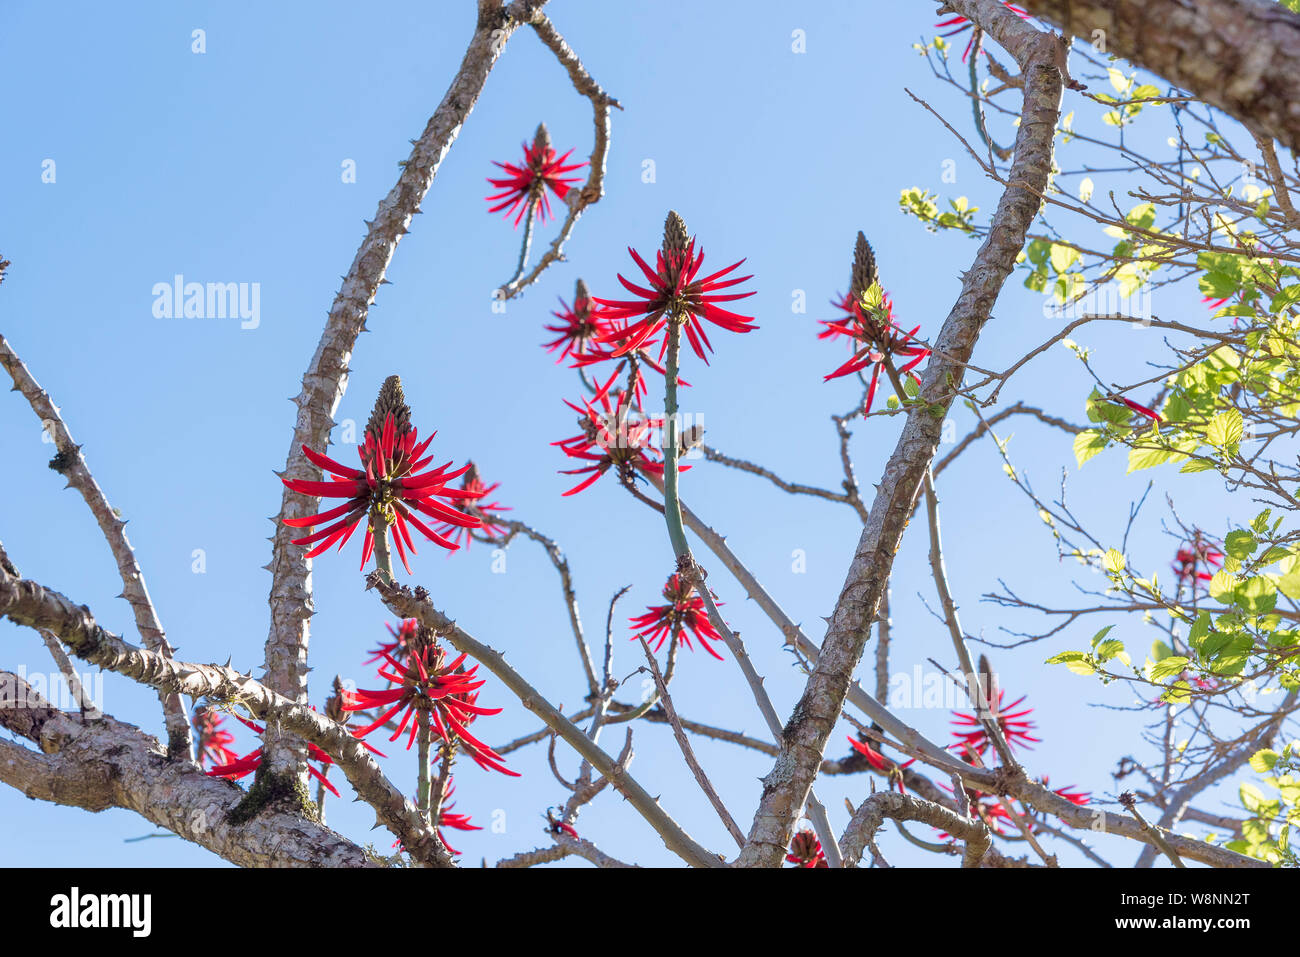 Eritrina Flowers-Chandelier (Erythrina speciosa). Tree that measures 3 to 5 meters high. The plant has thorns and is widely used in landscaping due Stock Photo